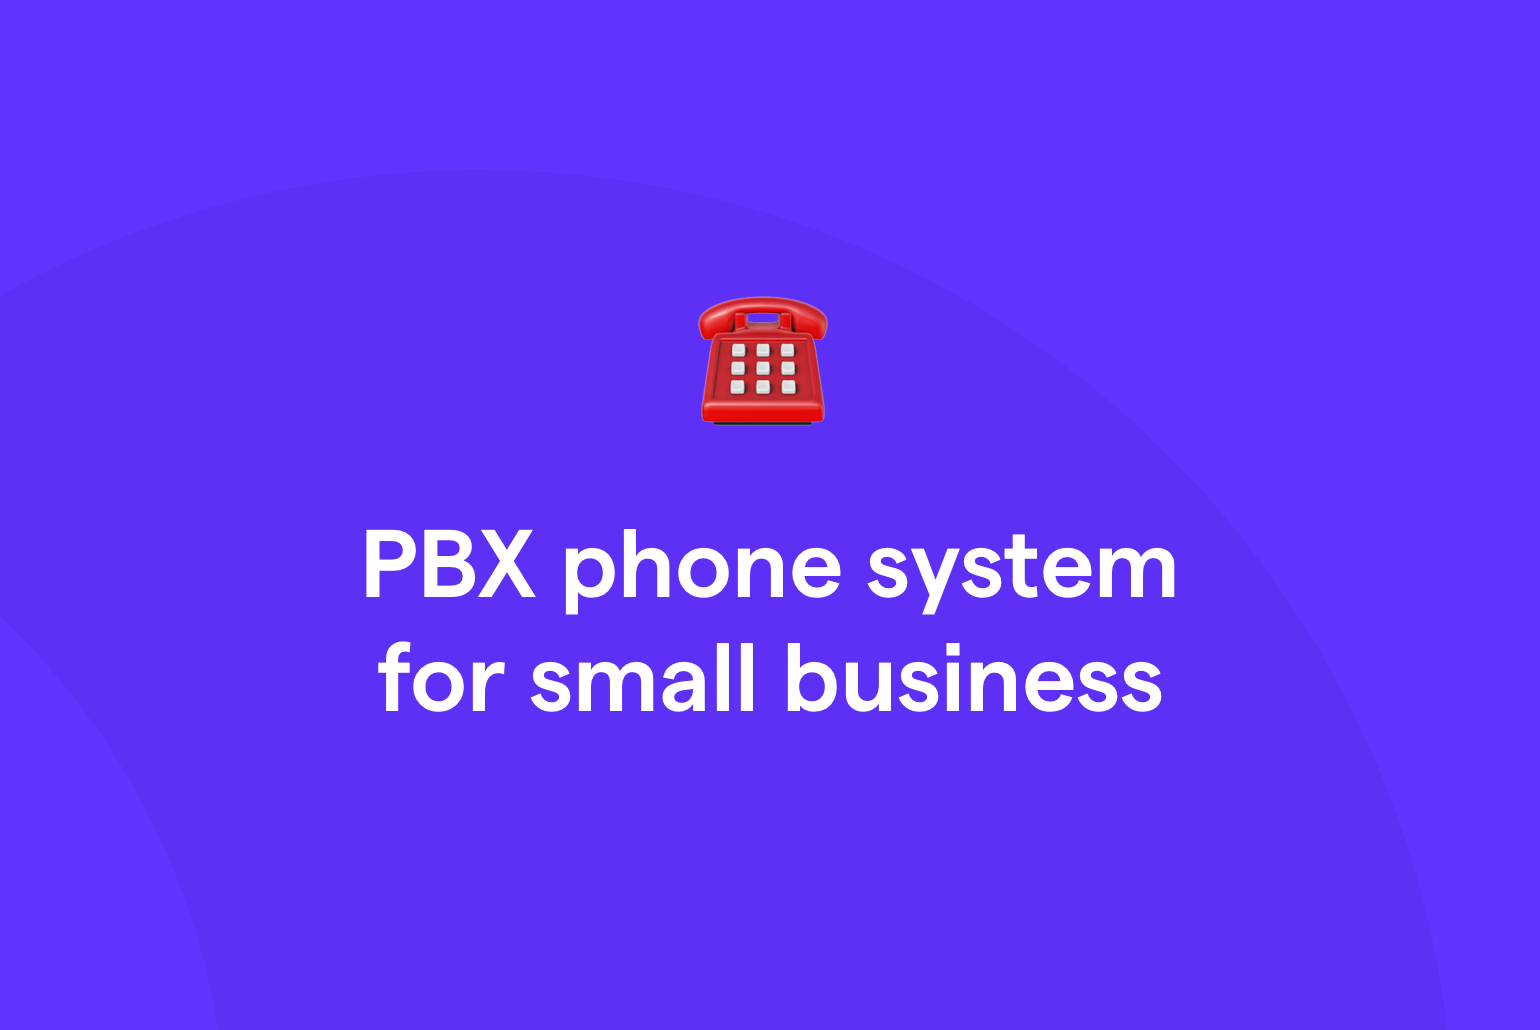 PBX System for Small Business: 6 Reasons You Should Avoid